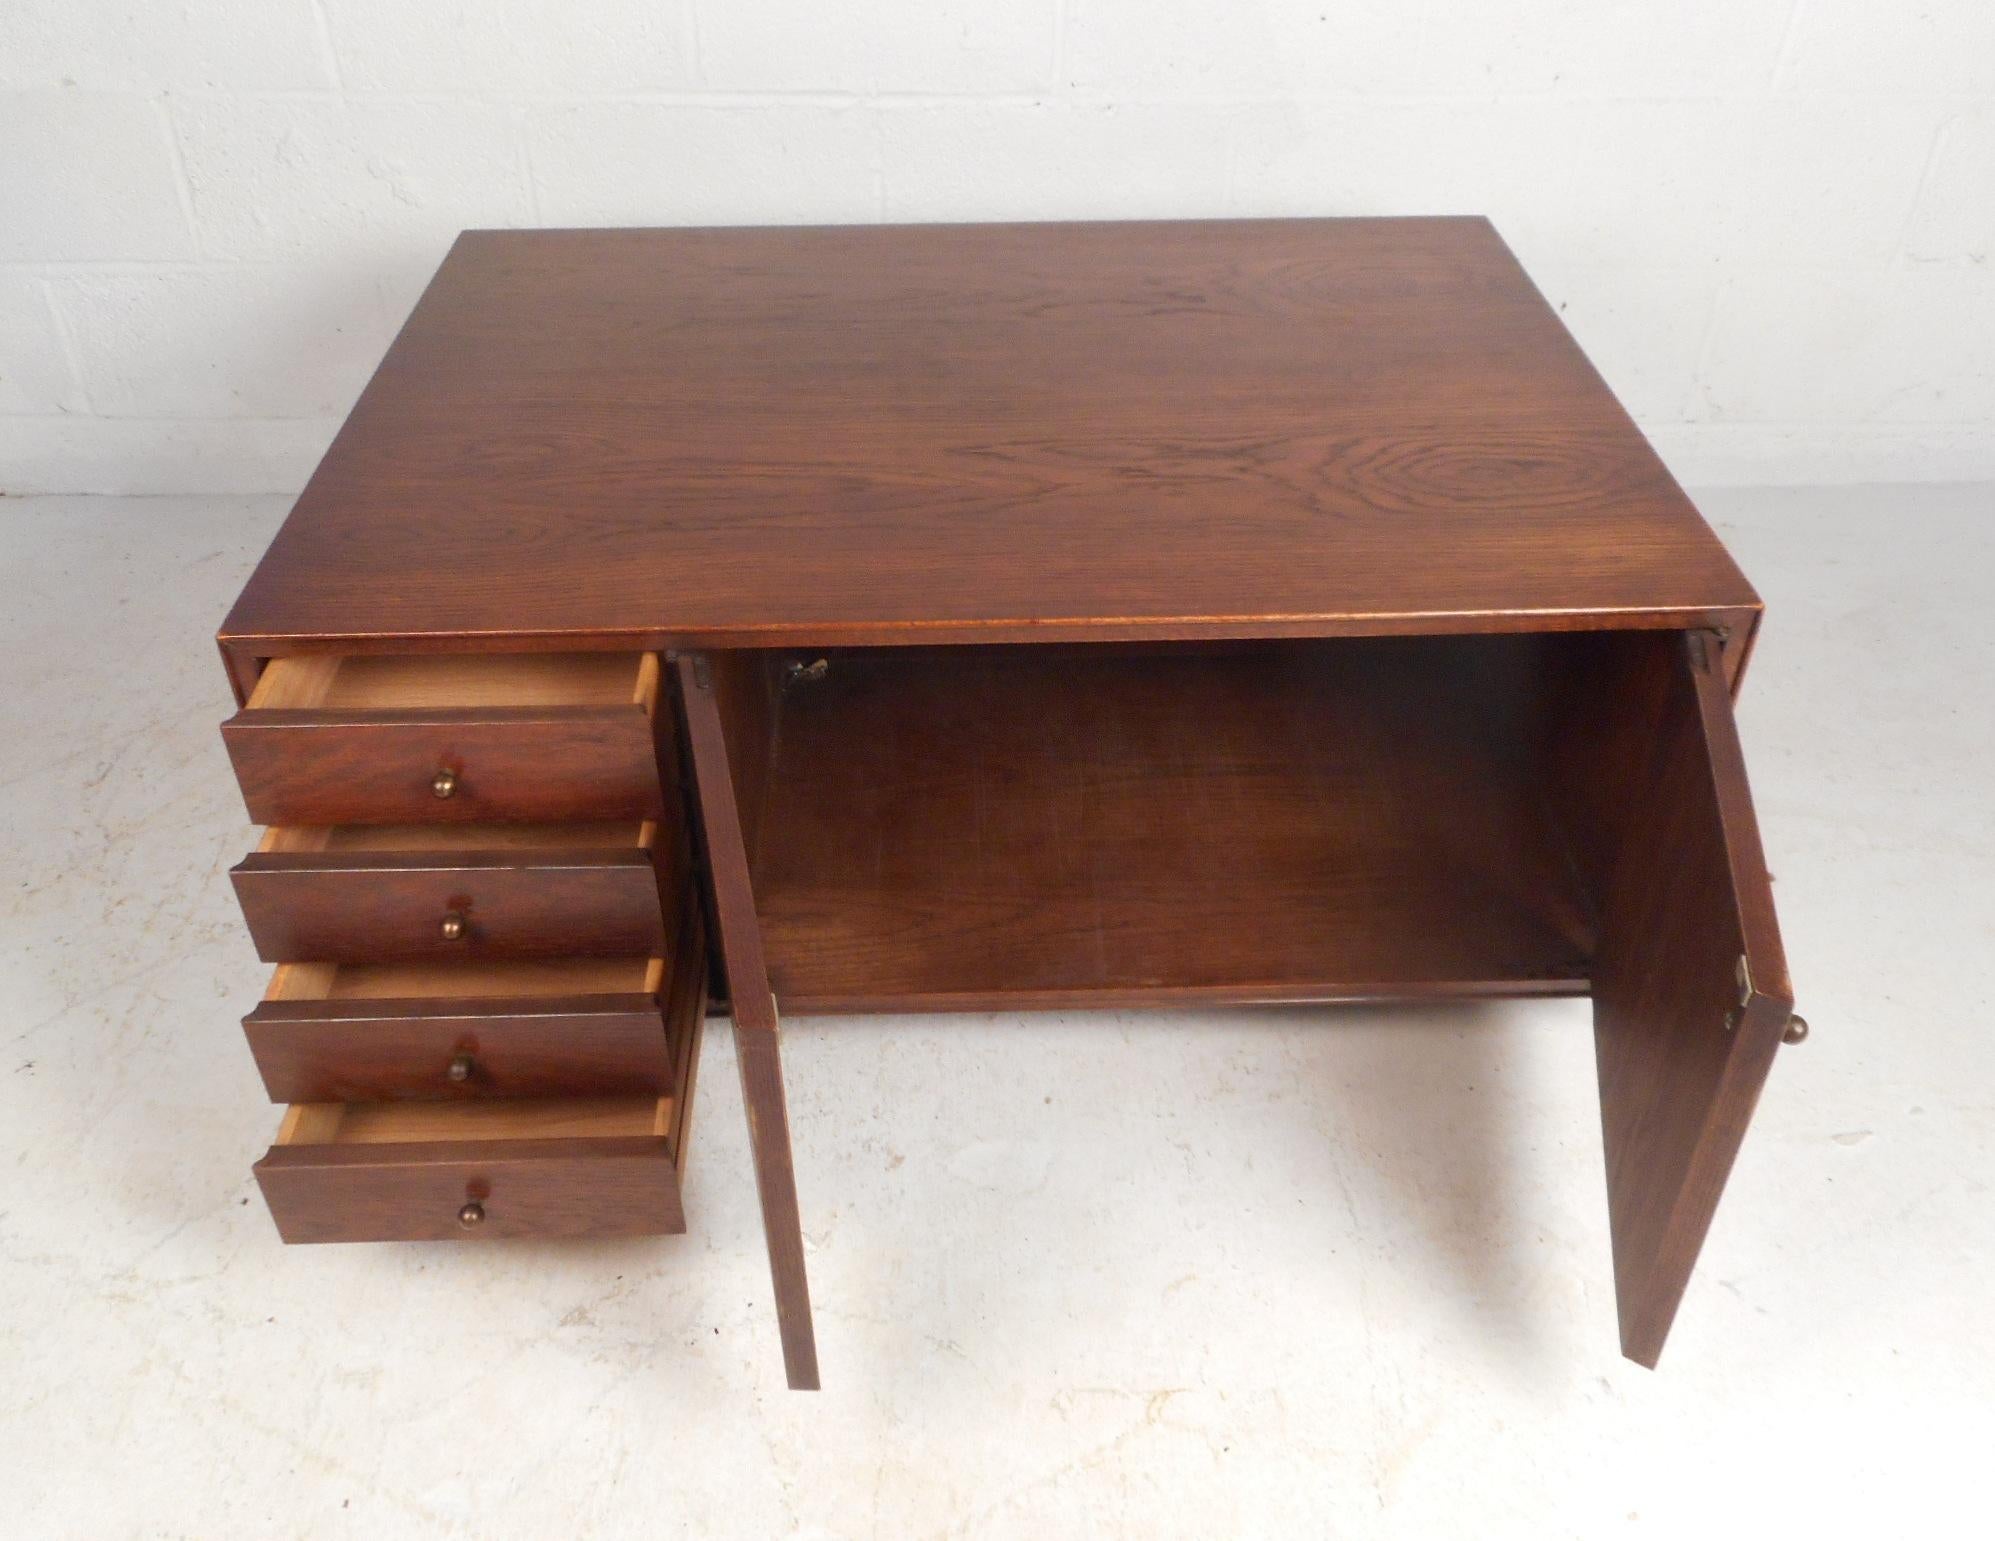 Metal Unique Midcentury Walnut Coffee Table with Storage Compartments